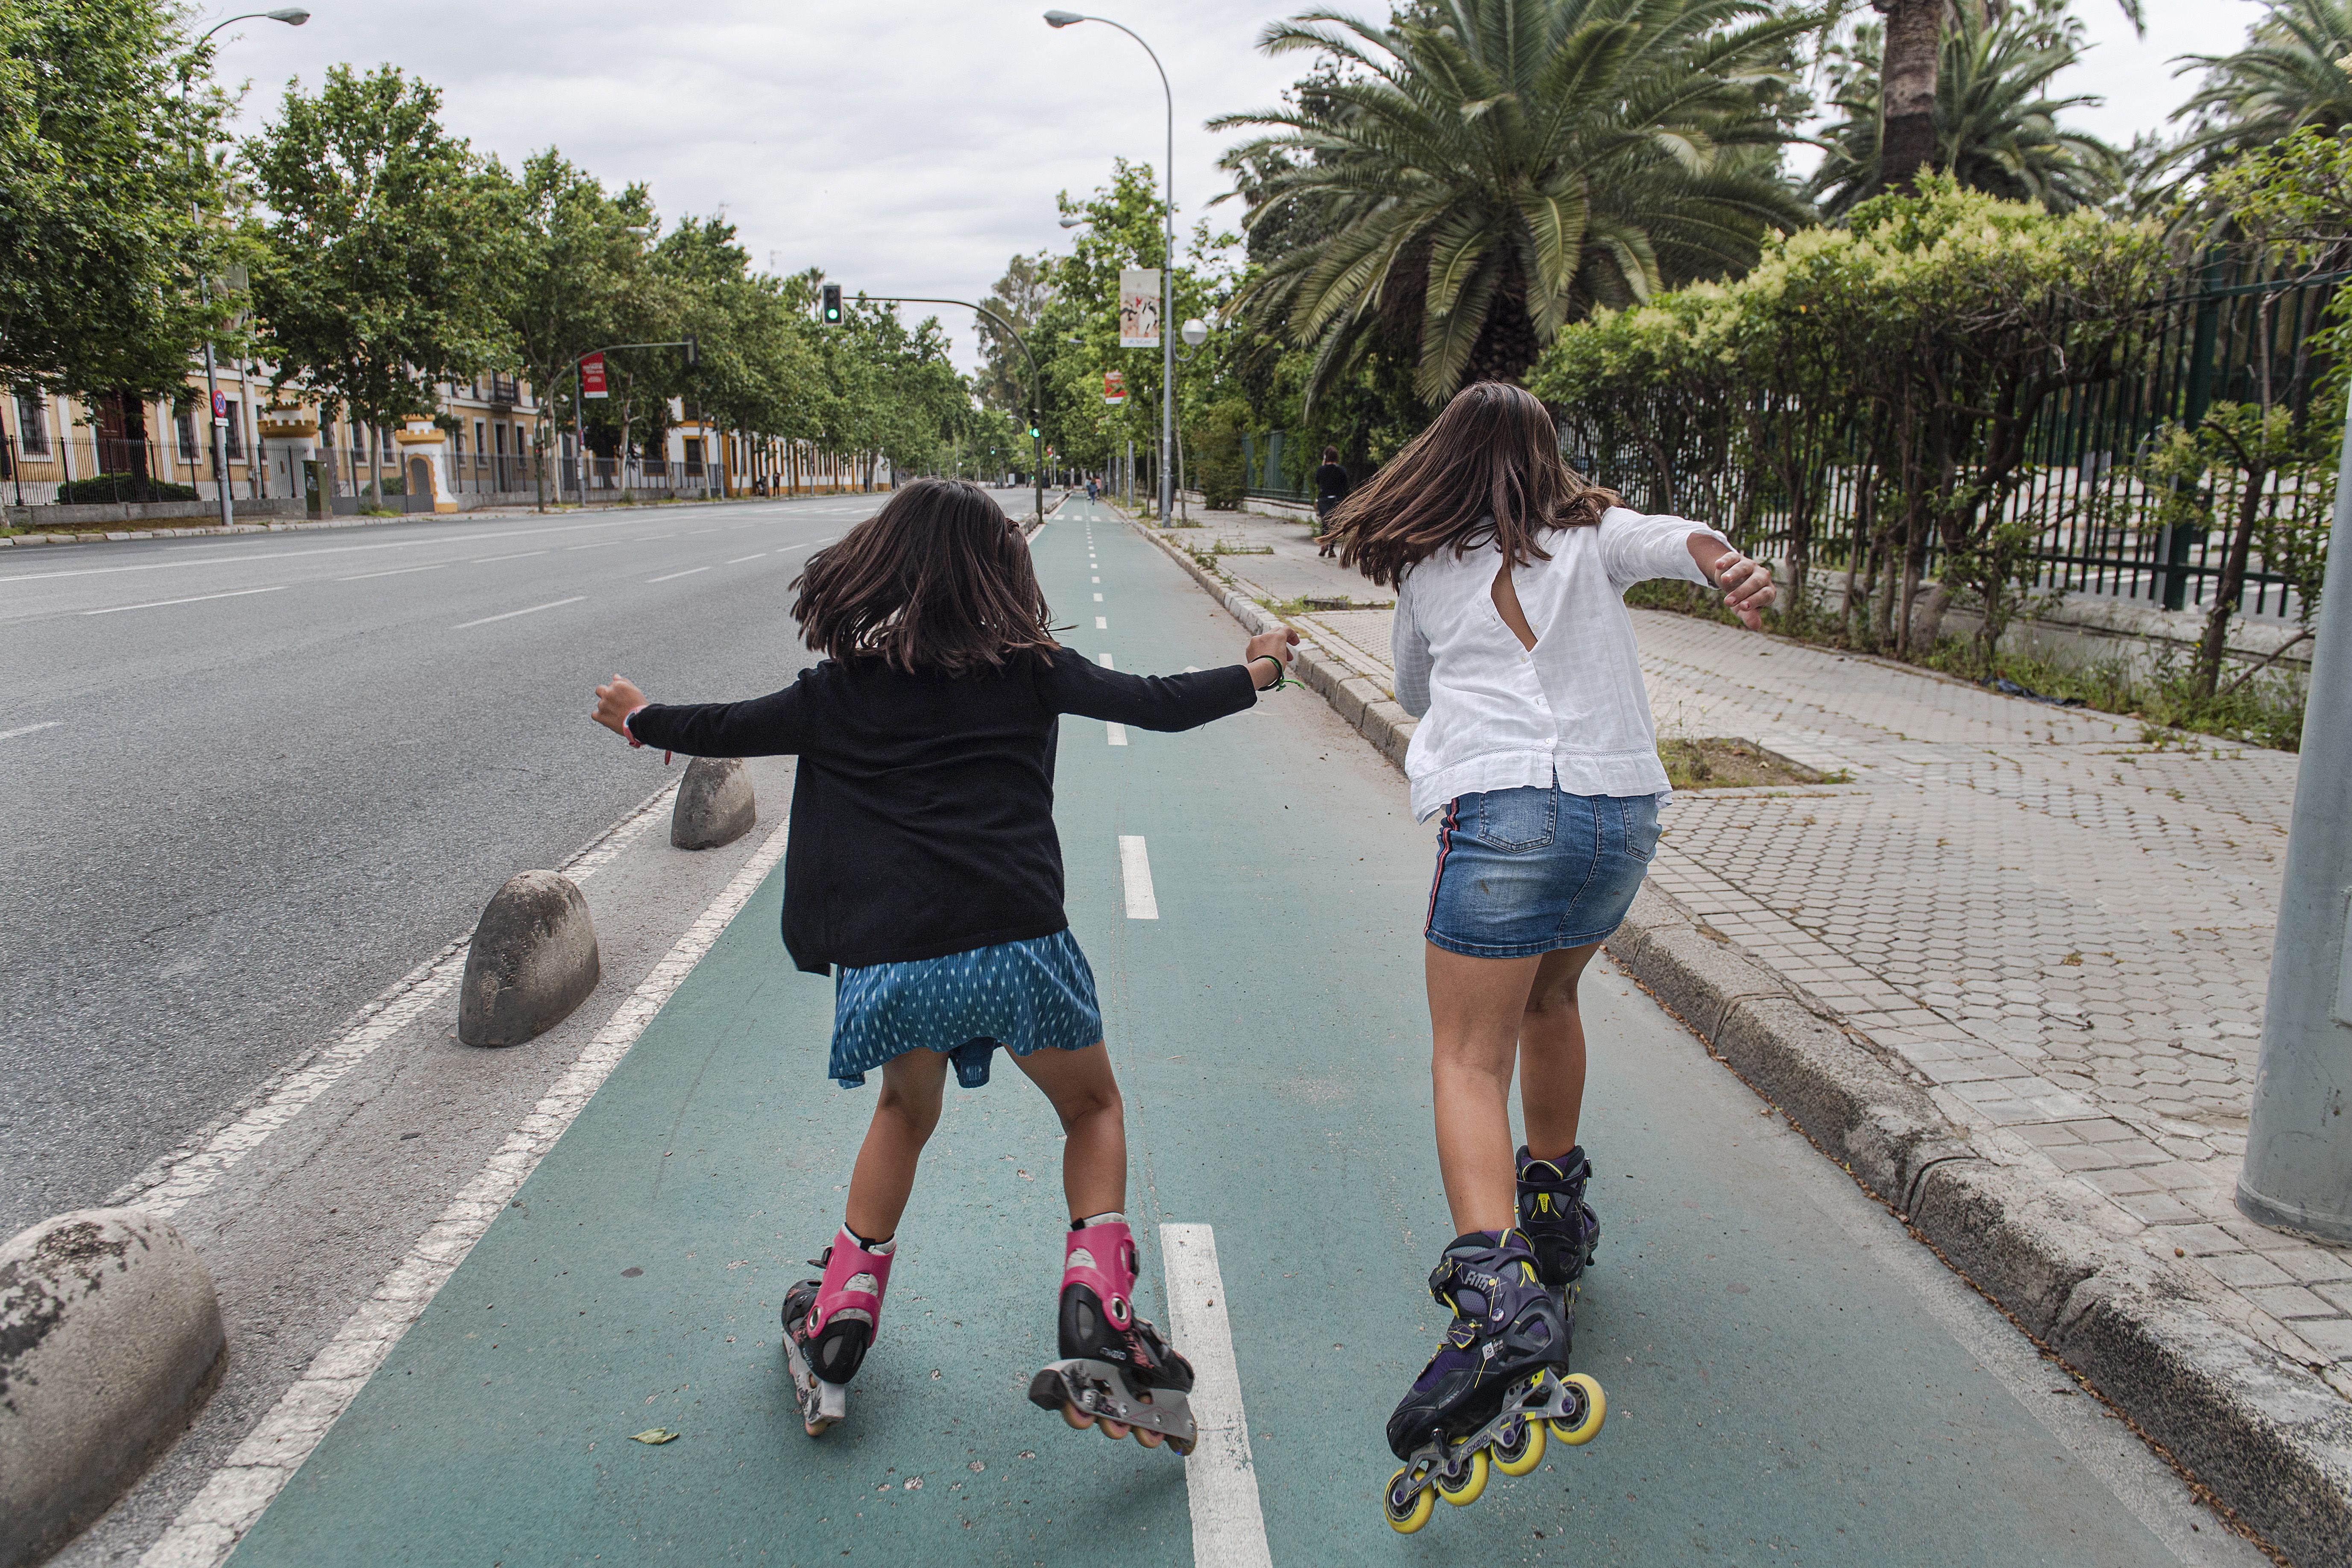 In this image, two girls rollerskate together